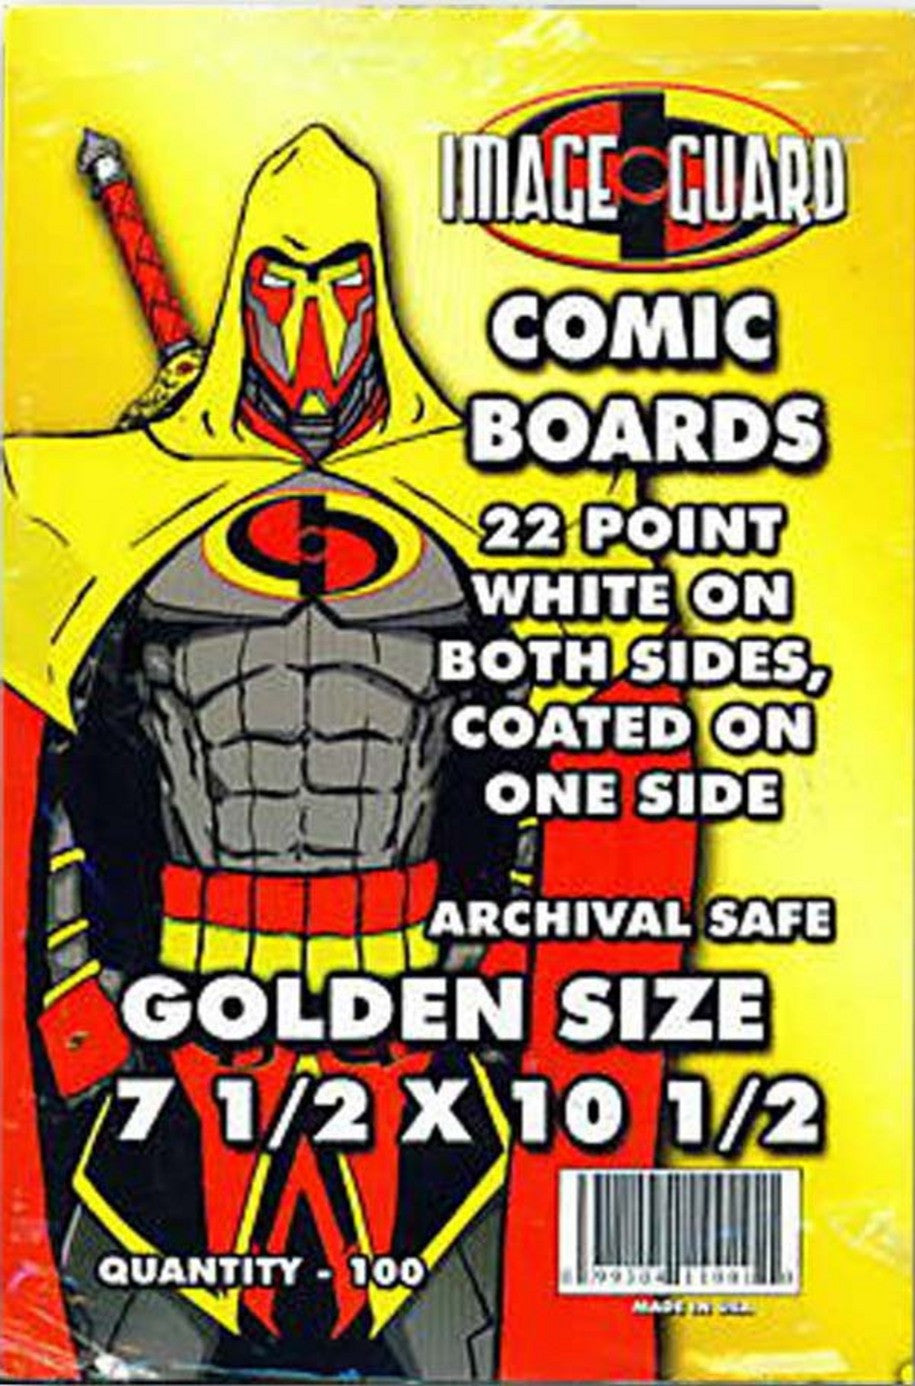 Image Guard Comic Backing Boards Golden Age Size